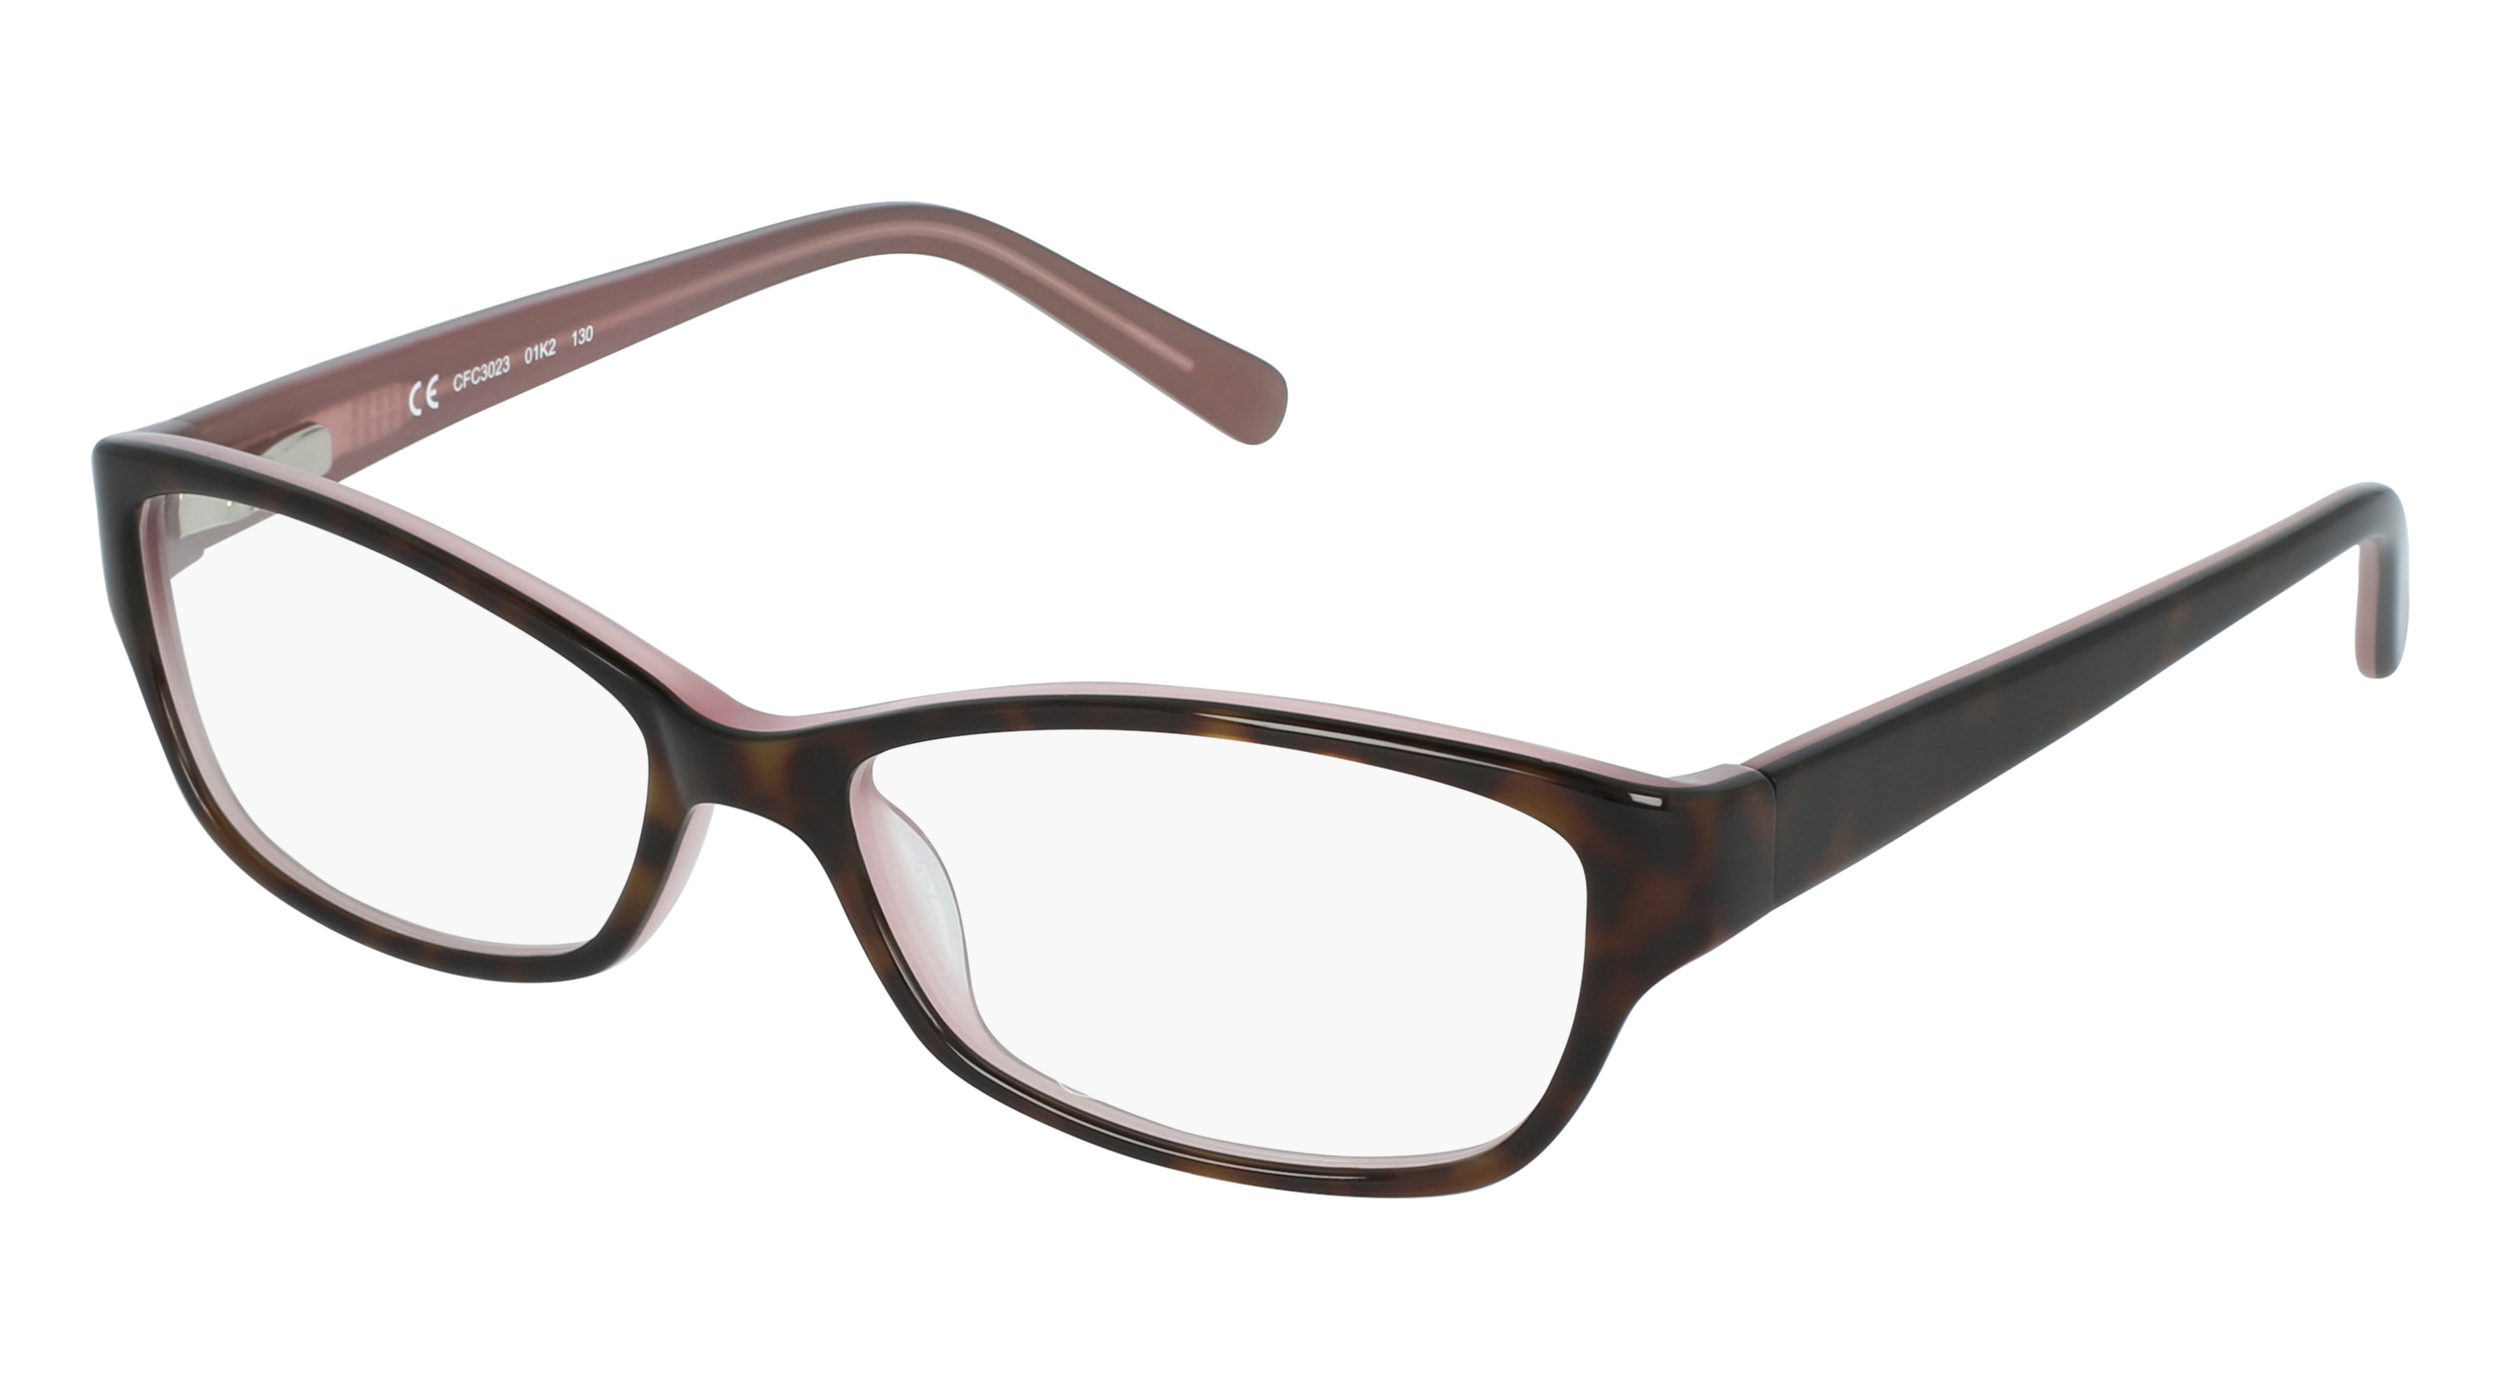 L CFC 3023 women's eyeglasses (from the side)